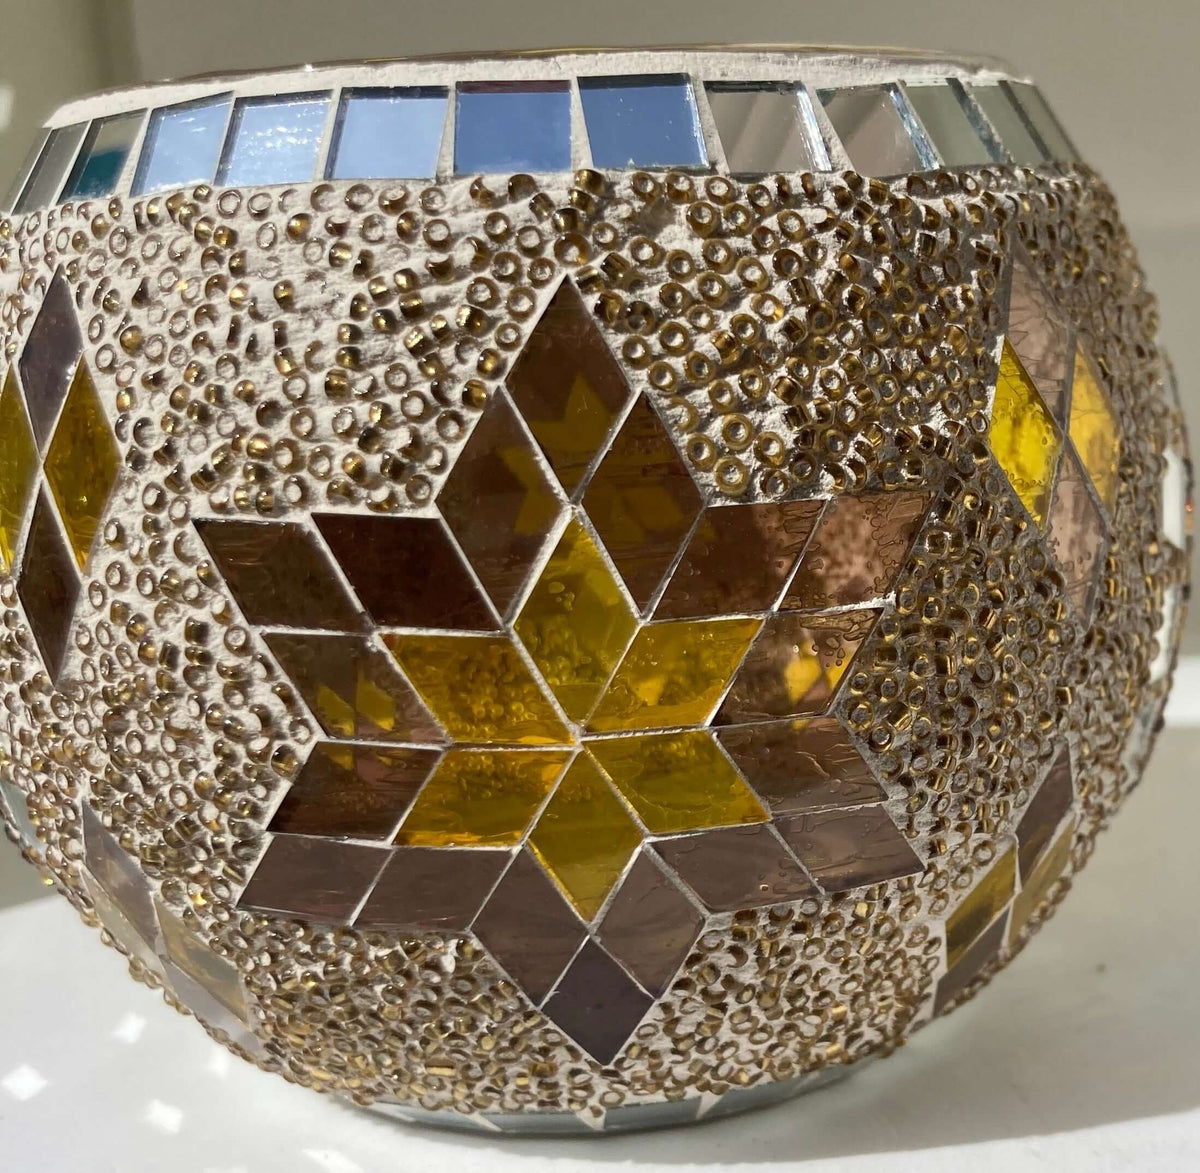 Mosaic Silver and Brown Circle and Pointed Star Candle Holder